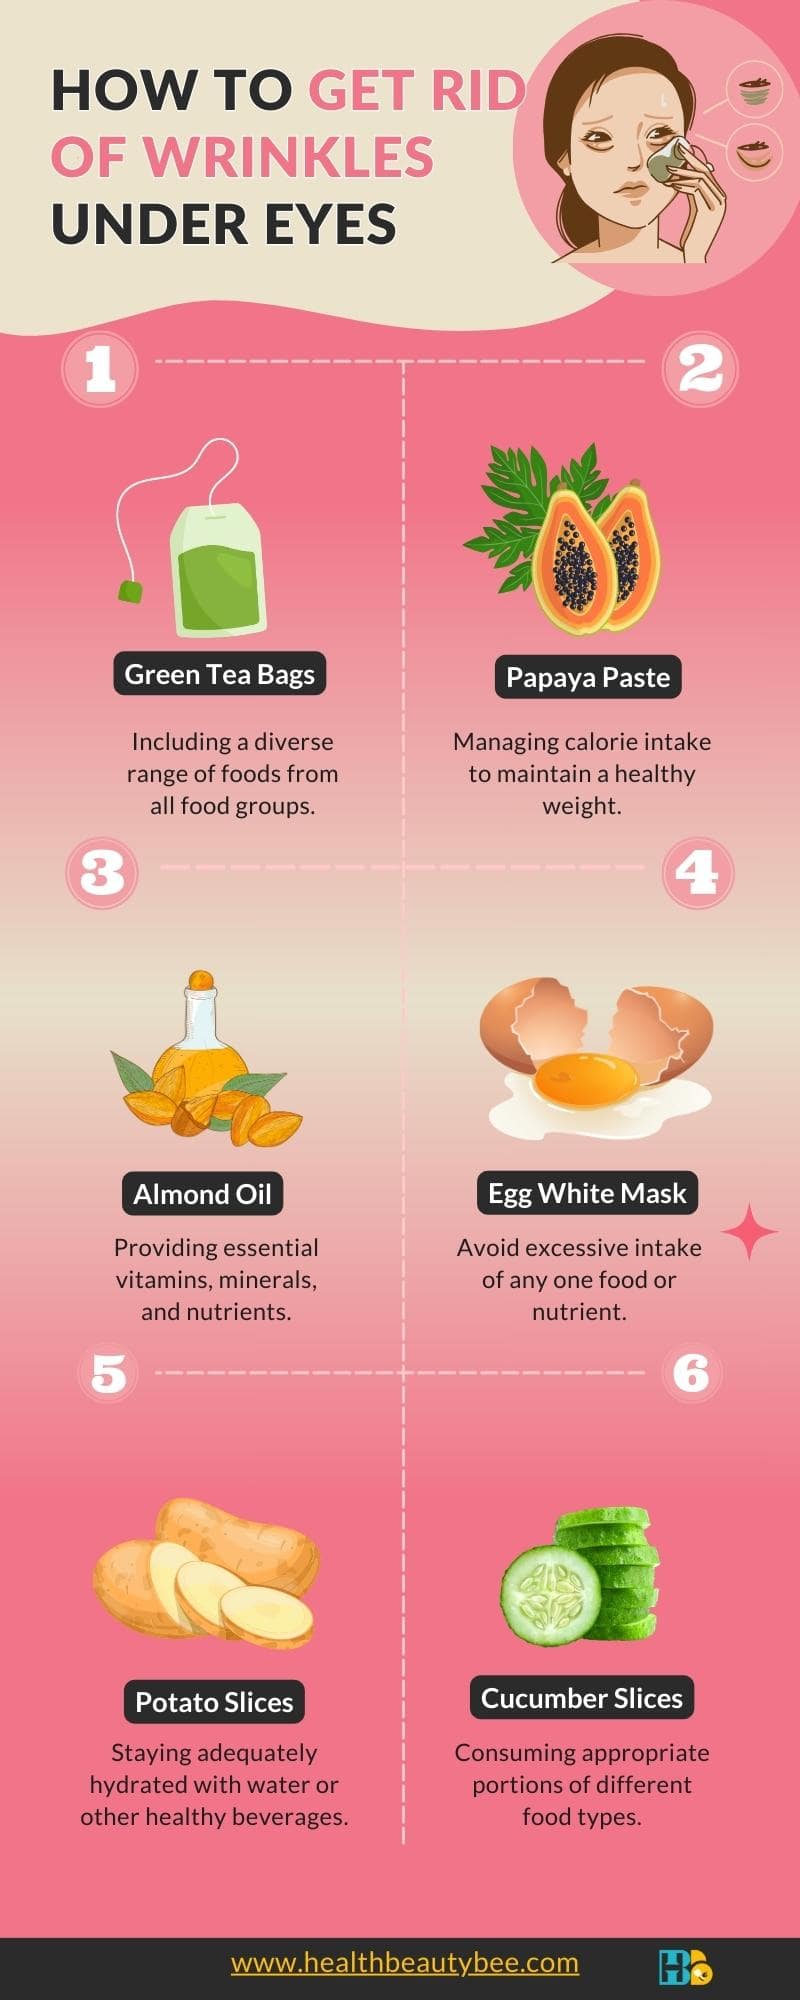 How to Get Rid of Wrinkles Under Eyes infographic healthbeautybee